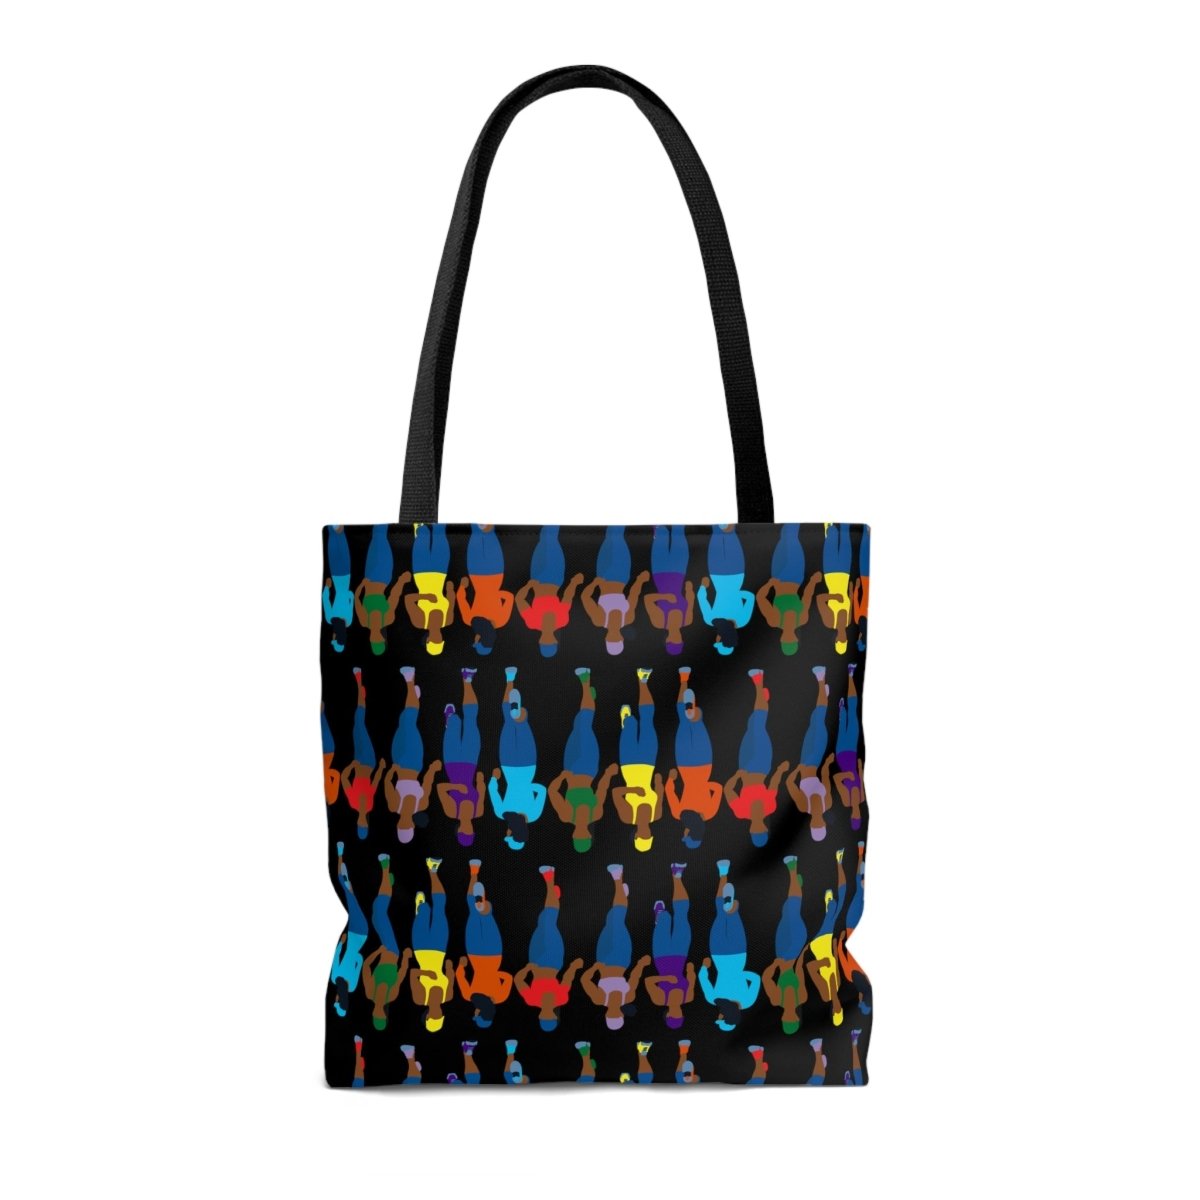 Running Woman Tote Bag - The Trini Gee